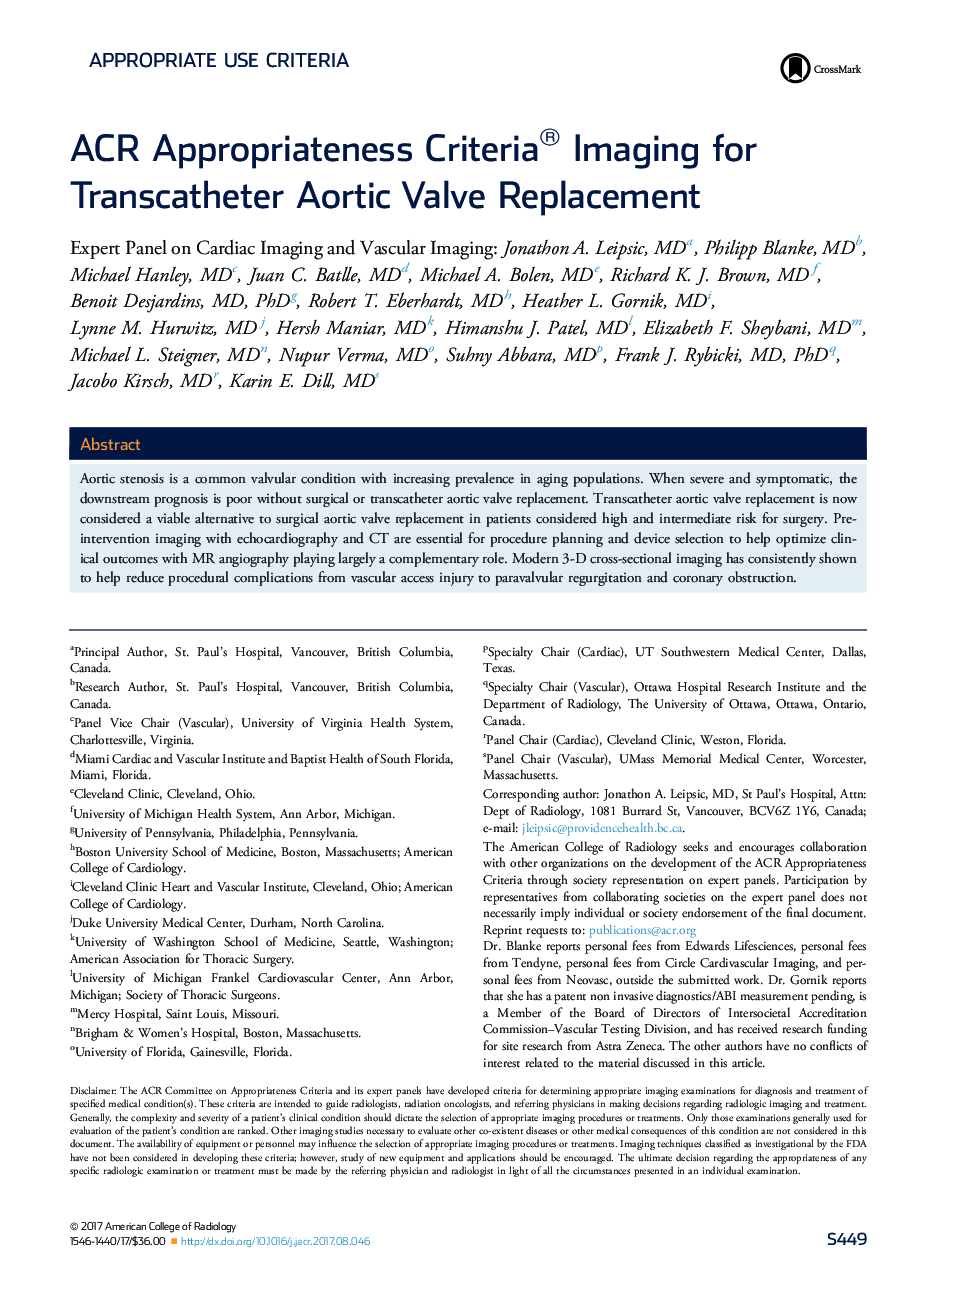 ACR Appropriateness Criteria® Imaging for Transcatheter Aortic Valve Replacement